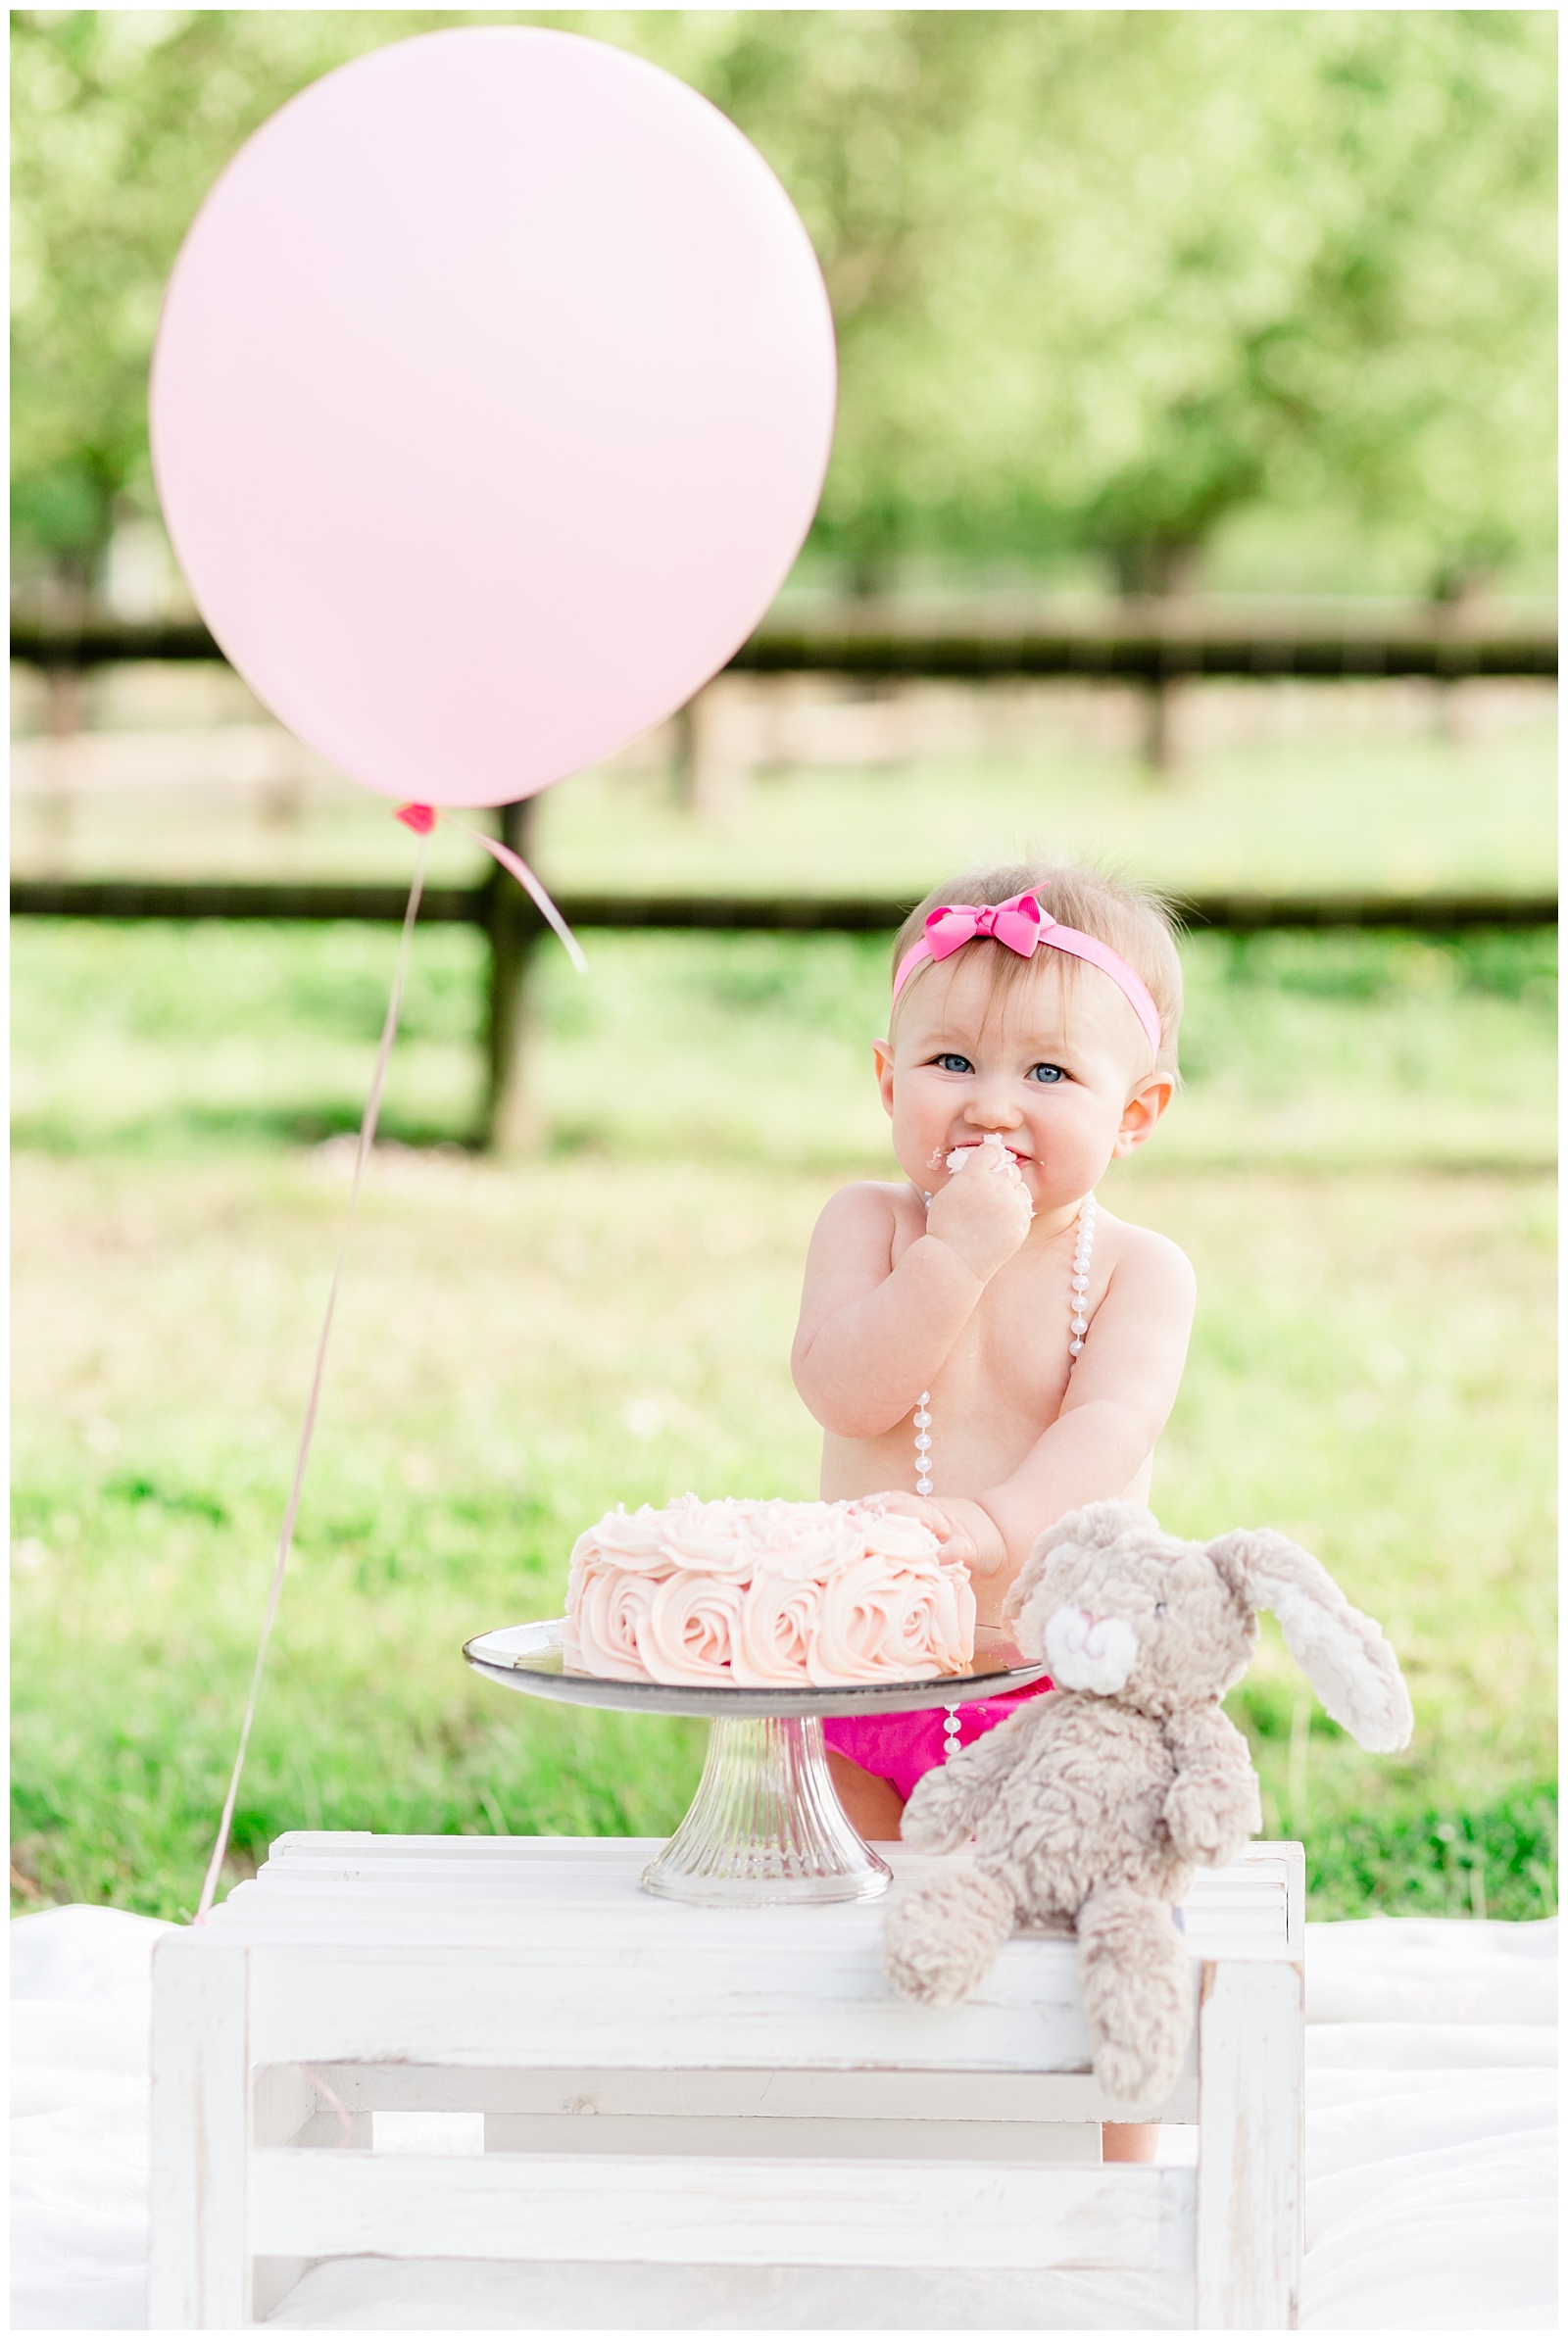 Cake Smash and One Year Old Birthday Session for Baby Girl with Different Shades of Pink, A Pink Cake and Pink Balloon